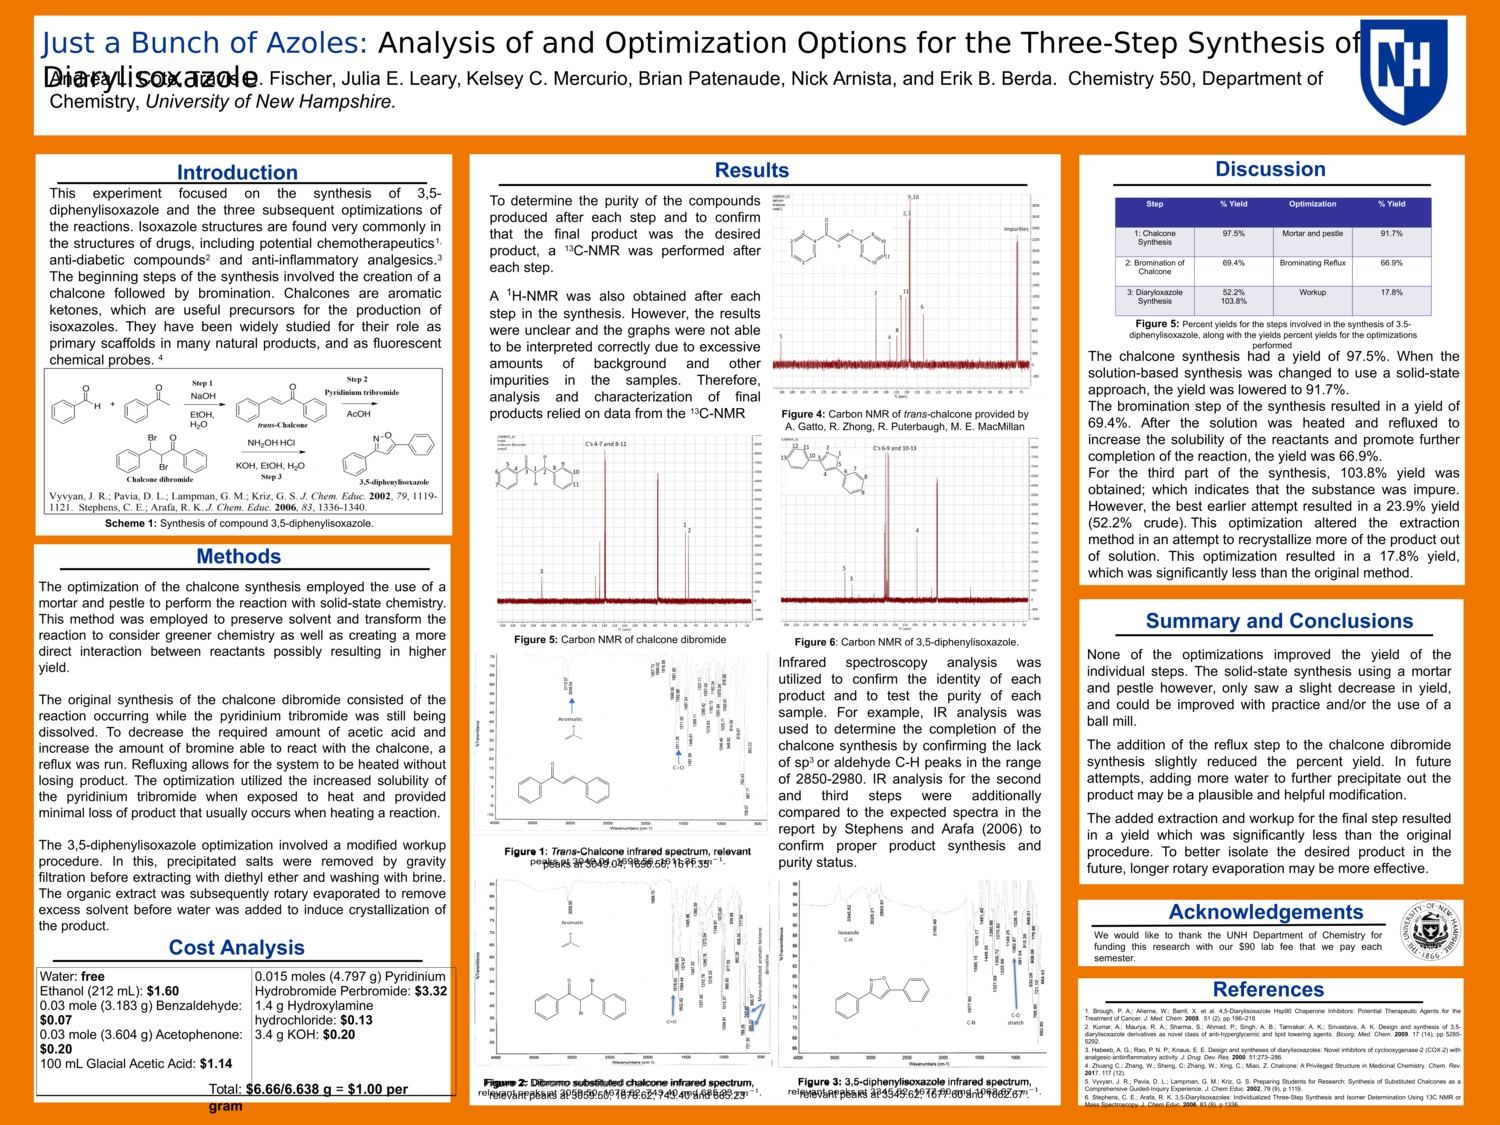 Just A Bunch Of Azoles: Analysis Of And Optimization Options For The Three-Step Synthesis Of 3,5-Diarylisoxazole by alc1055